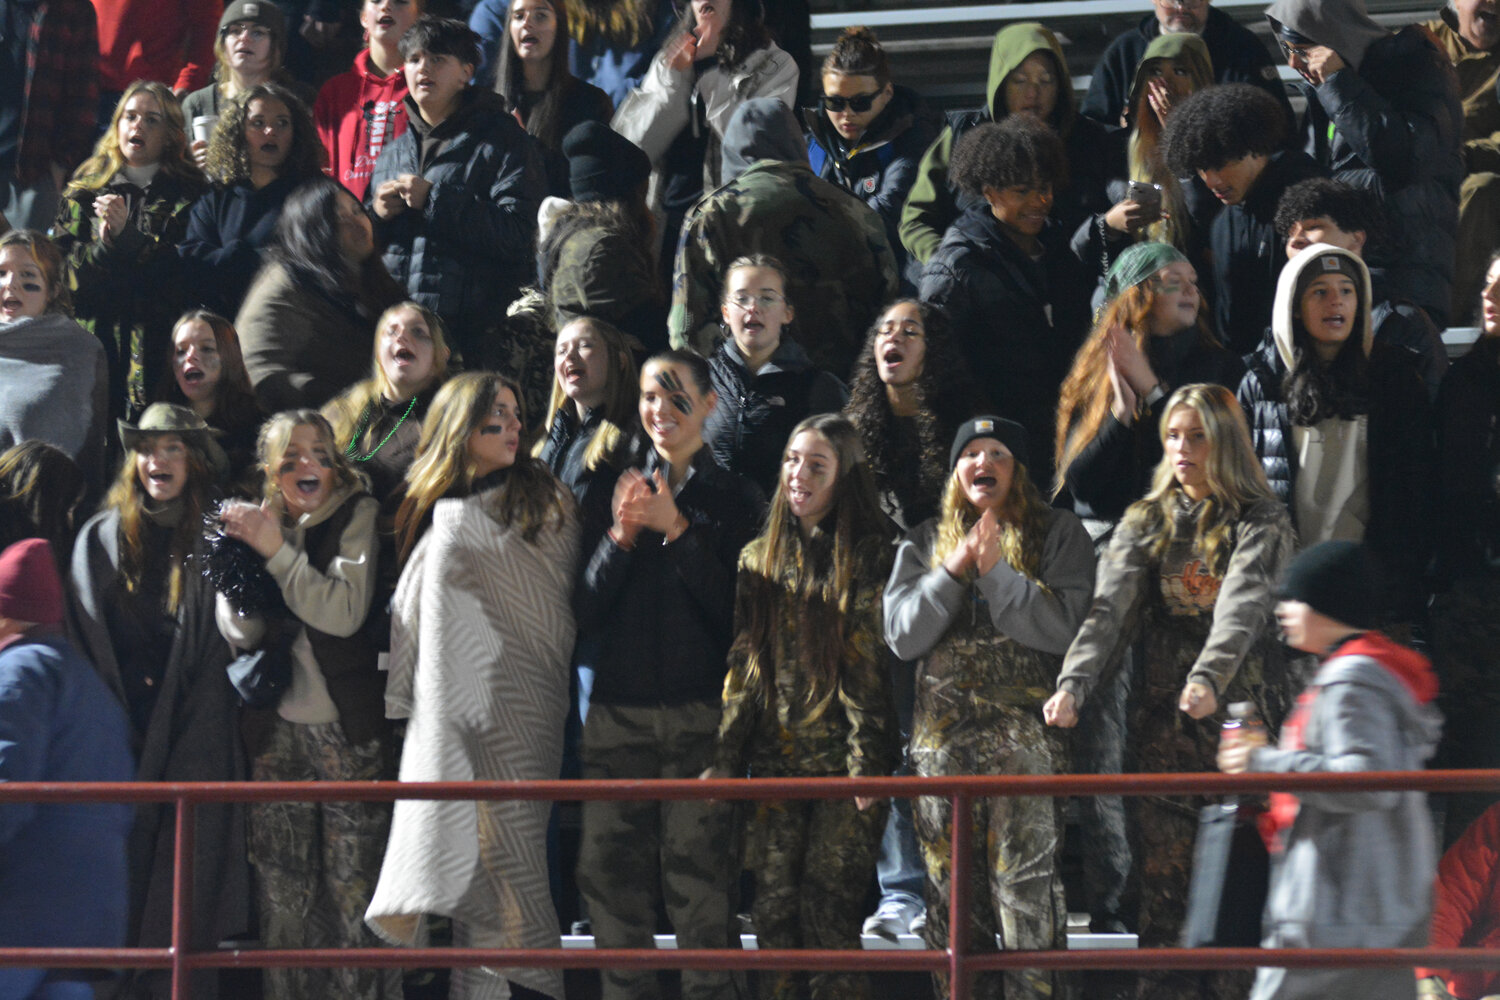 Members of the Tornados student section sing John Denver’s “Take Me Home, Country Roads” after Yelm defeated Mount Tahoma, 29-12, on Nov. 17 in the 3A state quarterfinals.